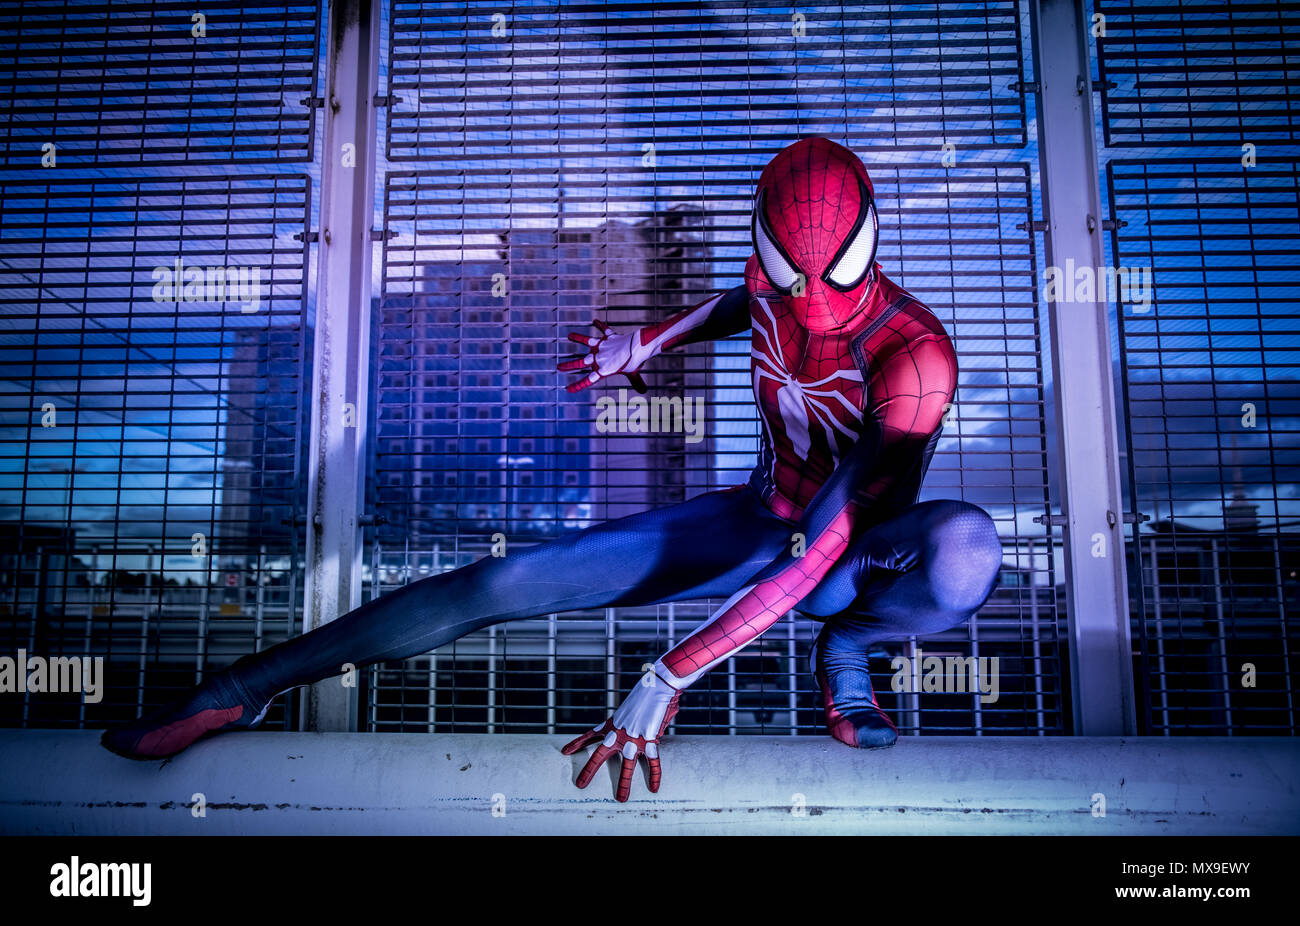 Cosplayeuse Spiderman spiderman dans son costume. Banque D'Images